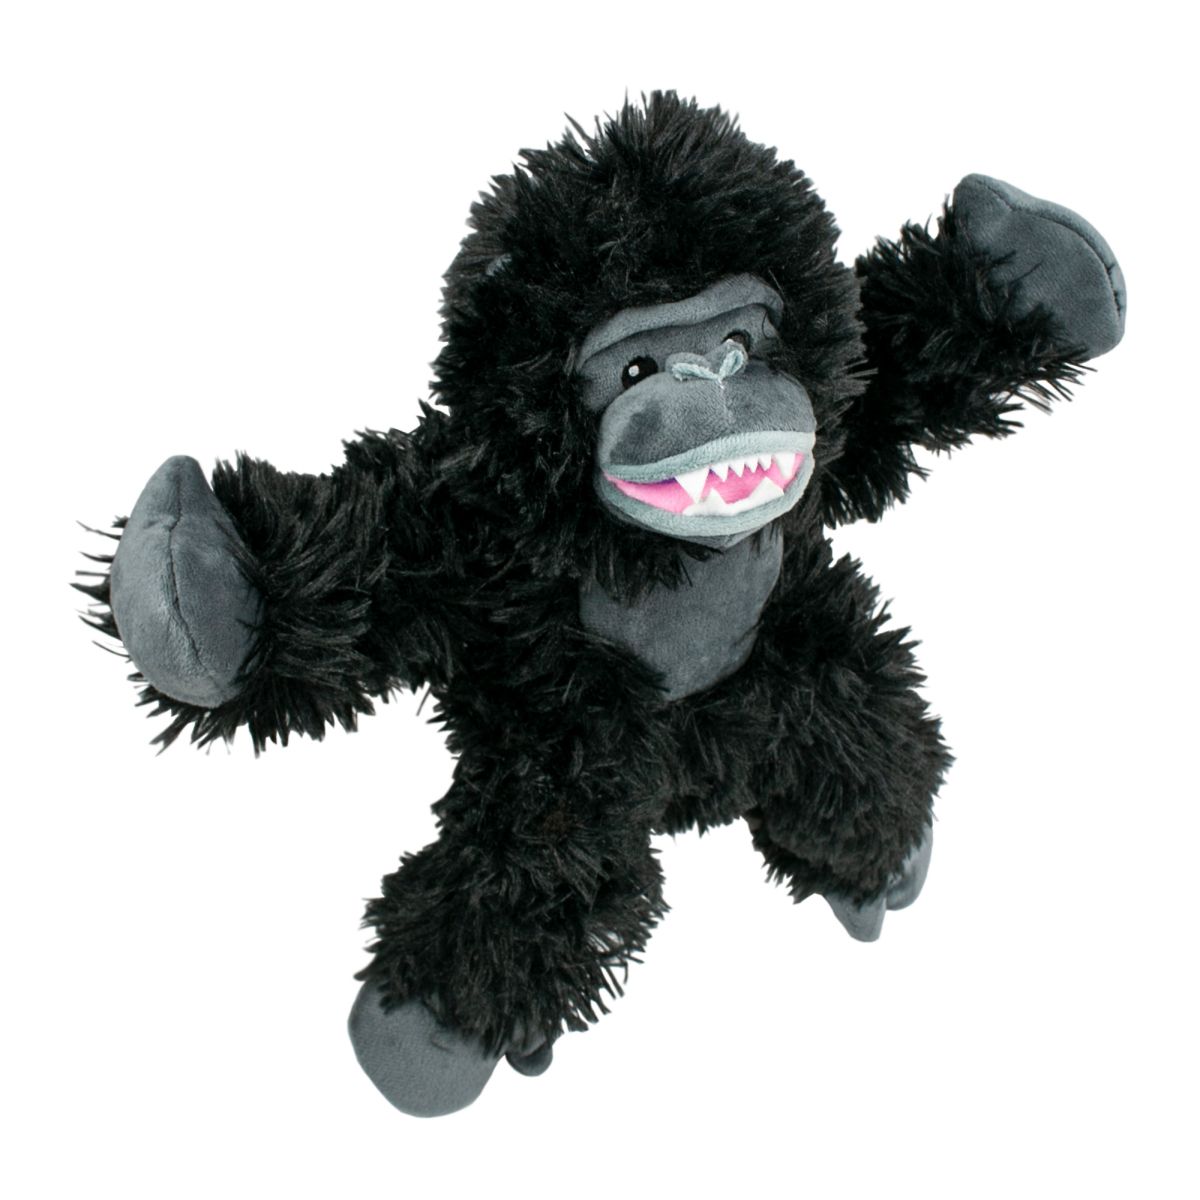 Tall Tails Rope Gorilla Dog Toy 14"-Four Muddy Paws